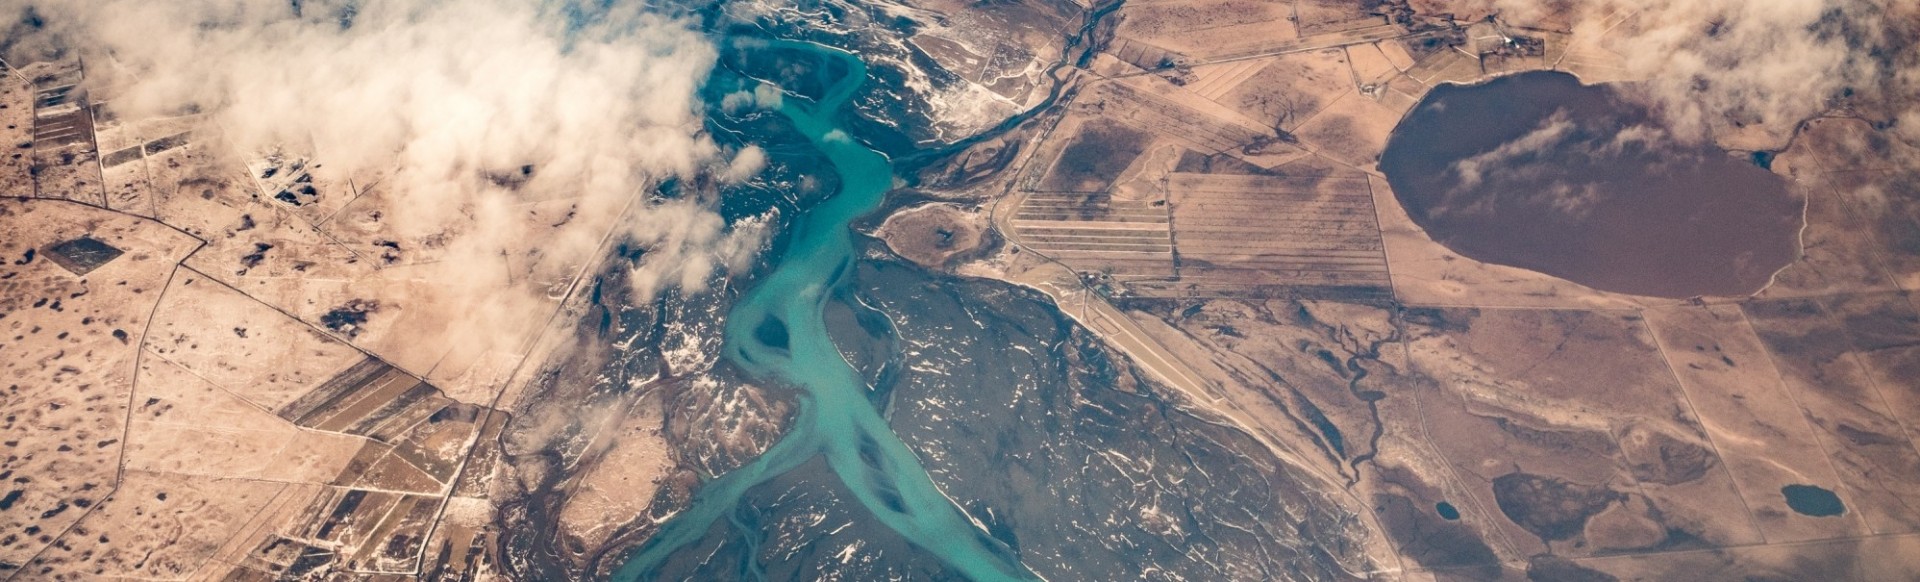 Satellite view of a river